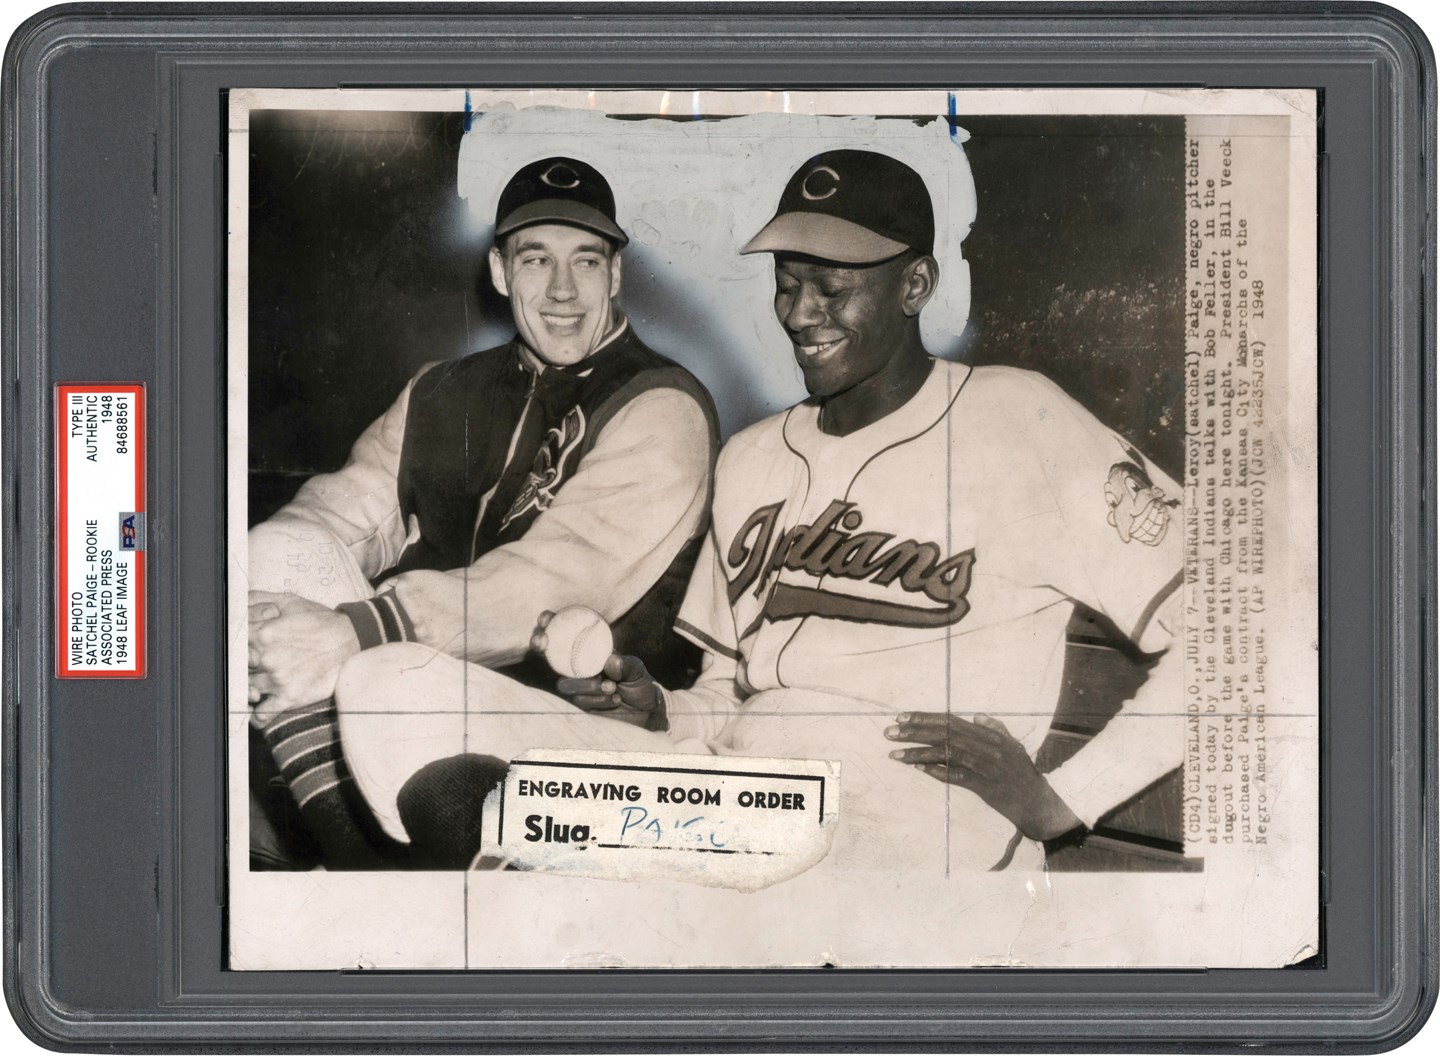 - 1948 Satchel Paige Rookie Photograph Used for 1948 Leaf Rookie Card (PSA Type III)